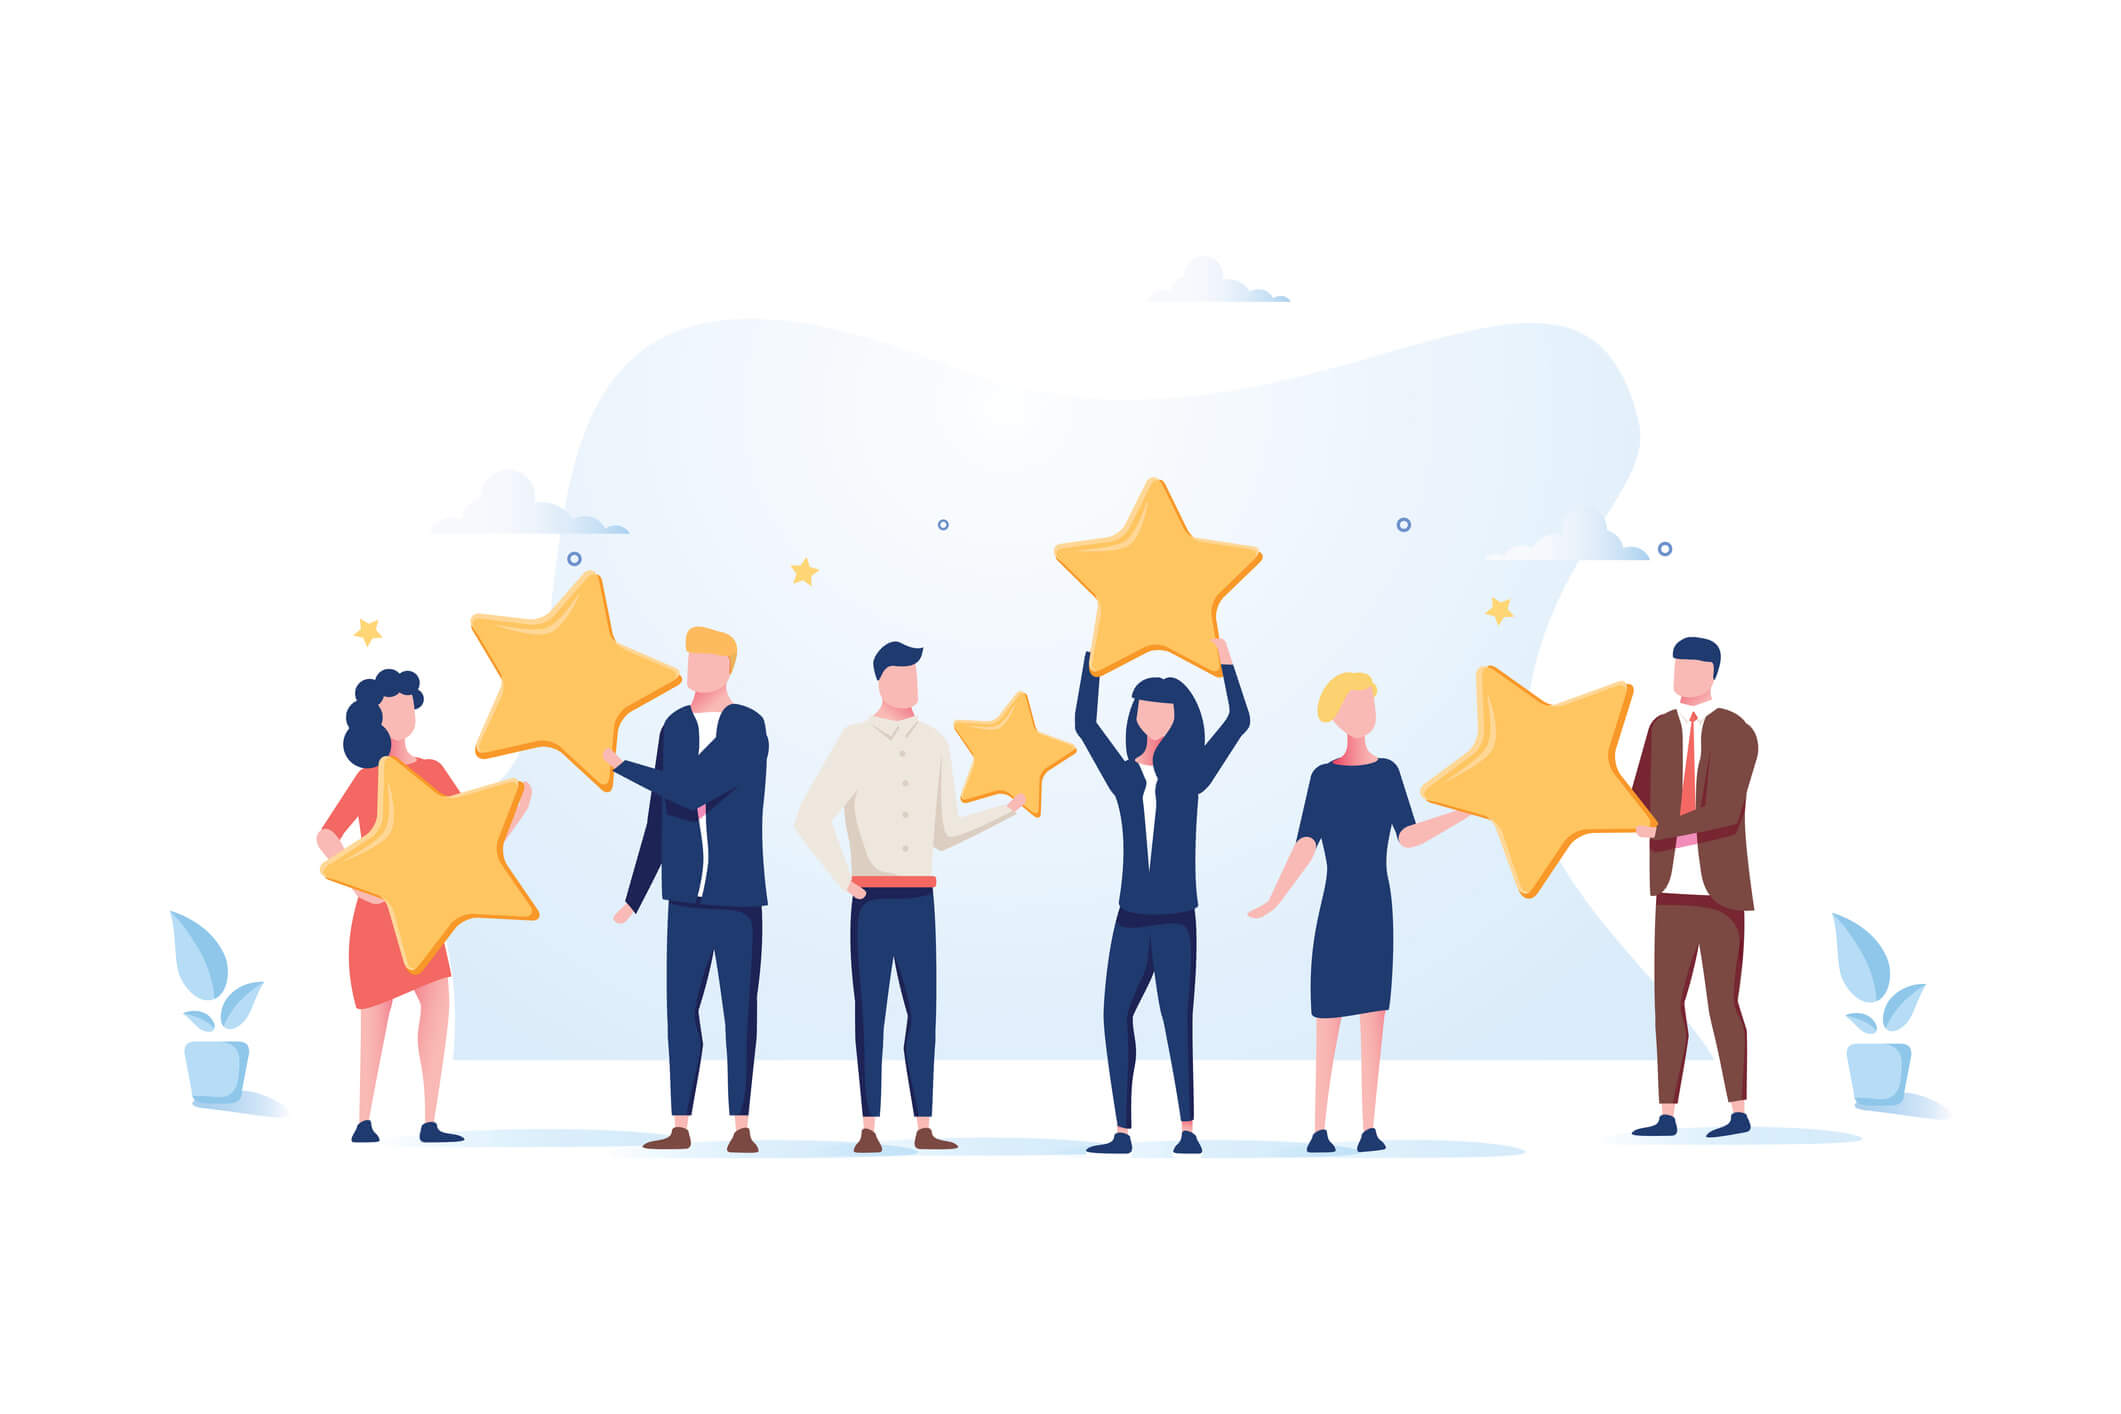 Customer review rating. Different People give review rating and feedback. Flat vector illustration. Customer choice. Know your client concept. Rank rating stars feedback. Business satisfaction support